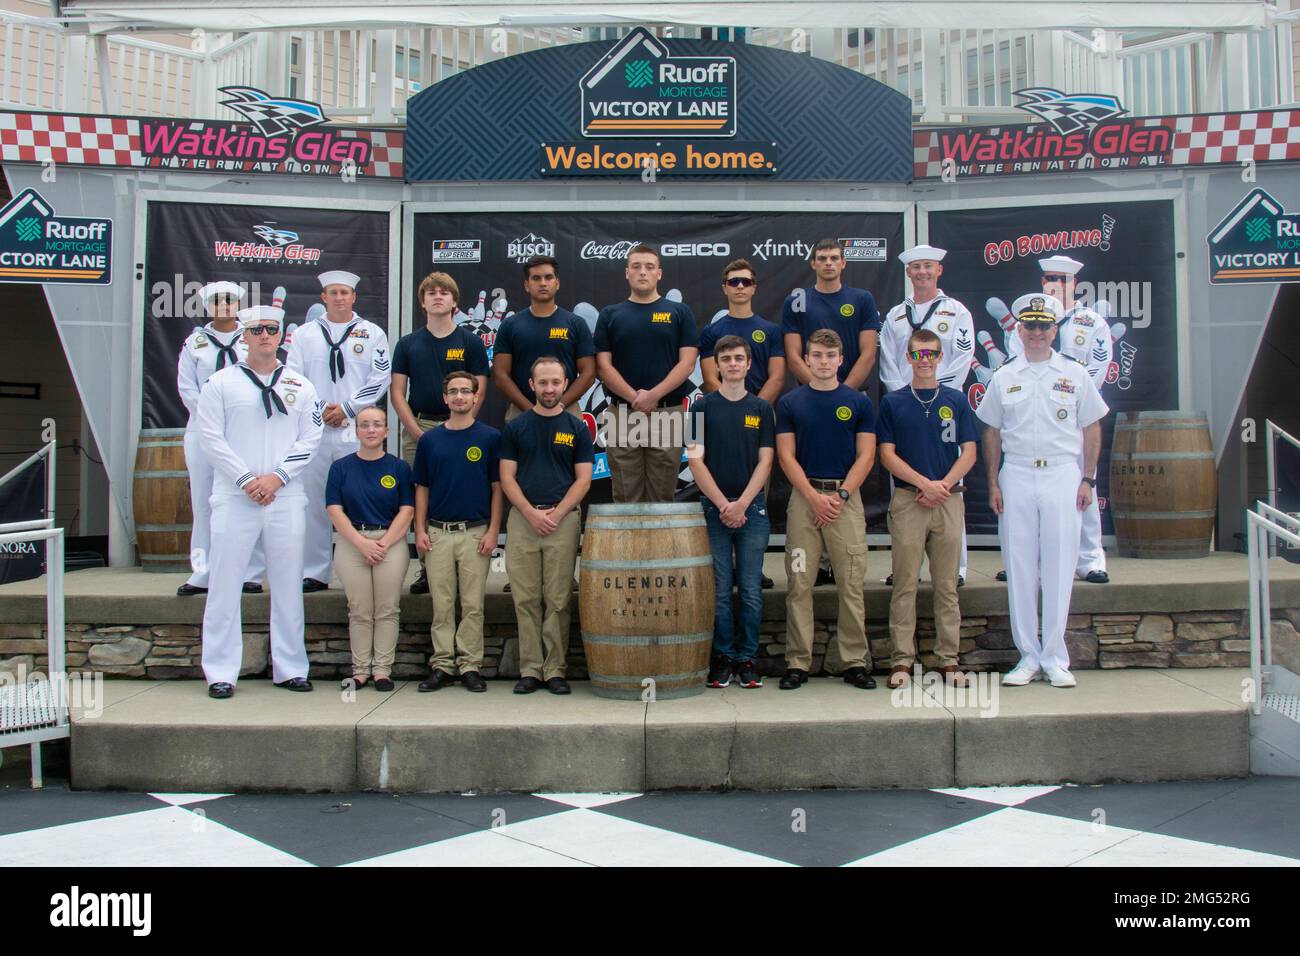 220821-N-RB168-0366 WATKINS GLEN, N.Y. (August 21, 2022) —  Future Sailors and recruiters from Navy Talent Acquisition Group (NTAG) Pittsburgh pose for a photo at the Go Bowling at The Glen, NASCAR Xfinity Series race following a mass enlistment ceremony. Cmdr. Christopher McCurry, commanding officer of NTAG Pittsburgh administered the oath for more than 11 future Sailors at the event. NTAG Pittsburgh, part of Navy Recruiting Command, recruits the next generation of Navy Sailors throughout areas in Pennsylvania, New York, West Virginia, and Maryland. Stock Photo